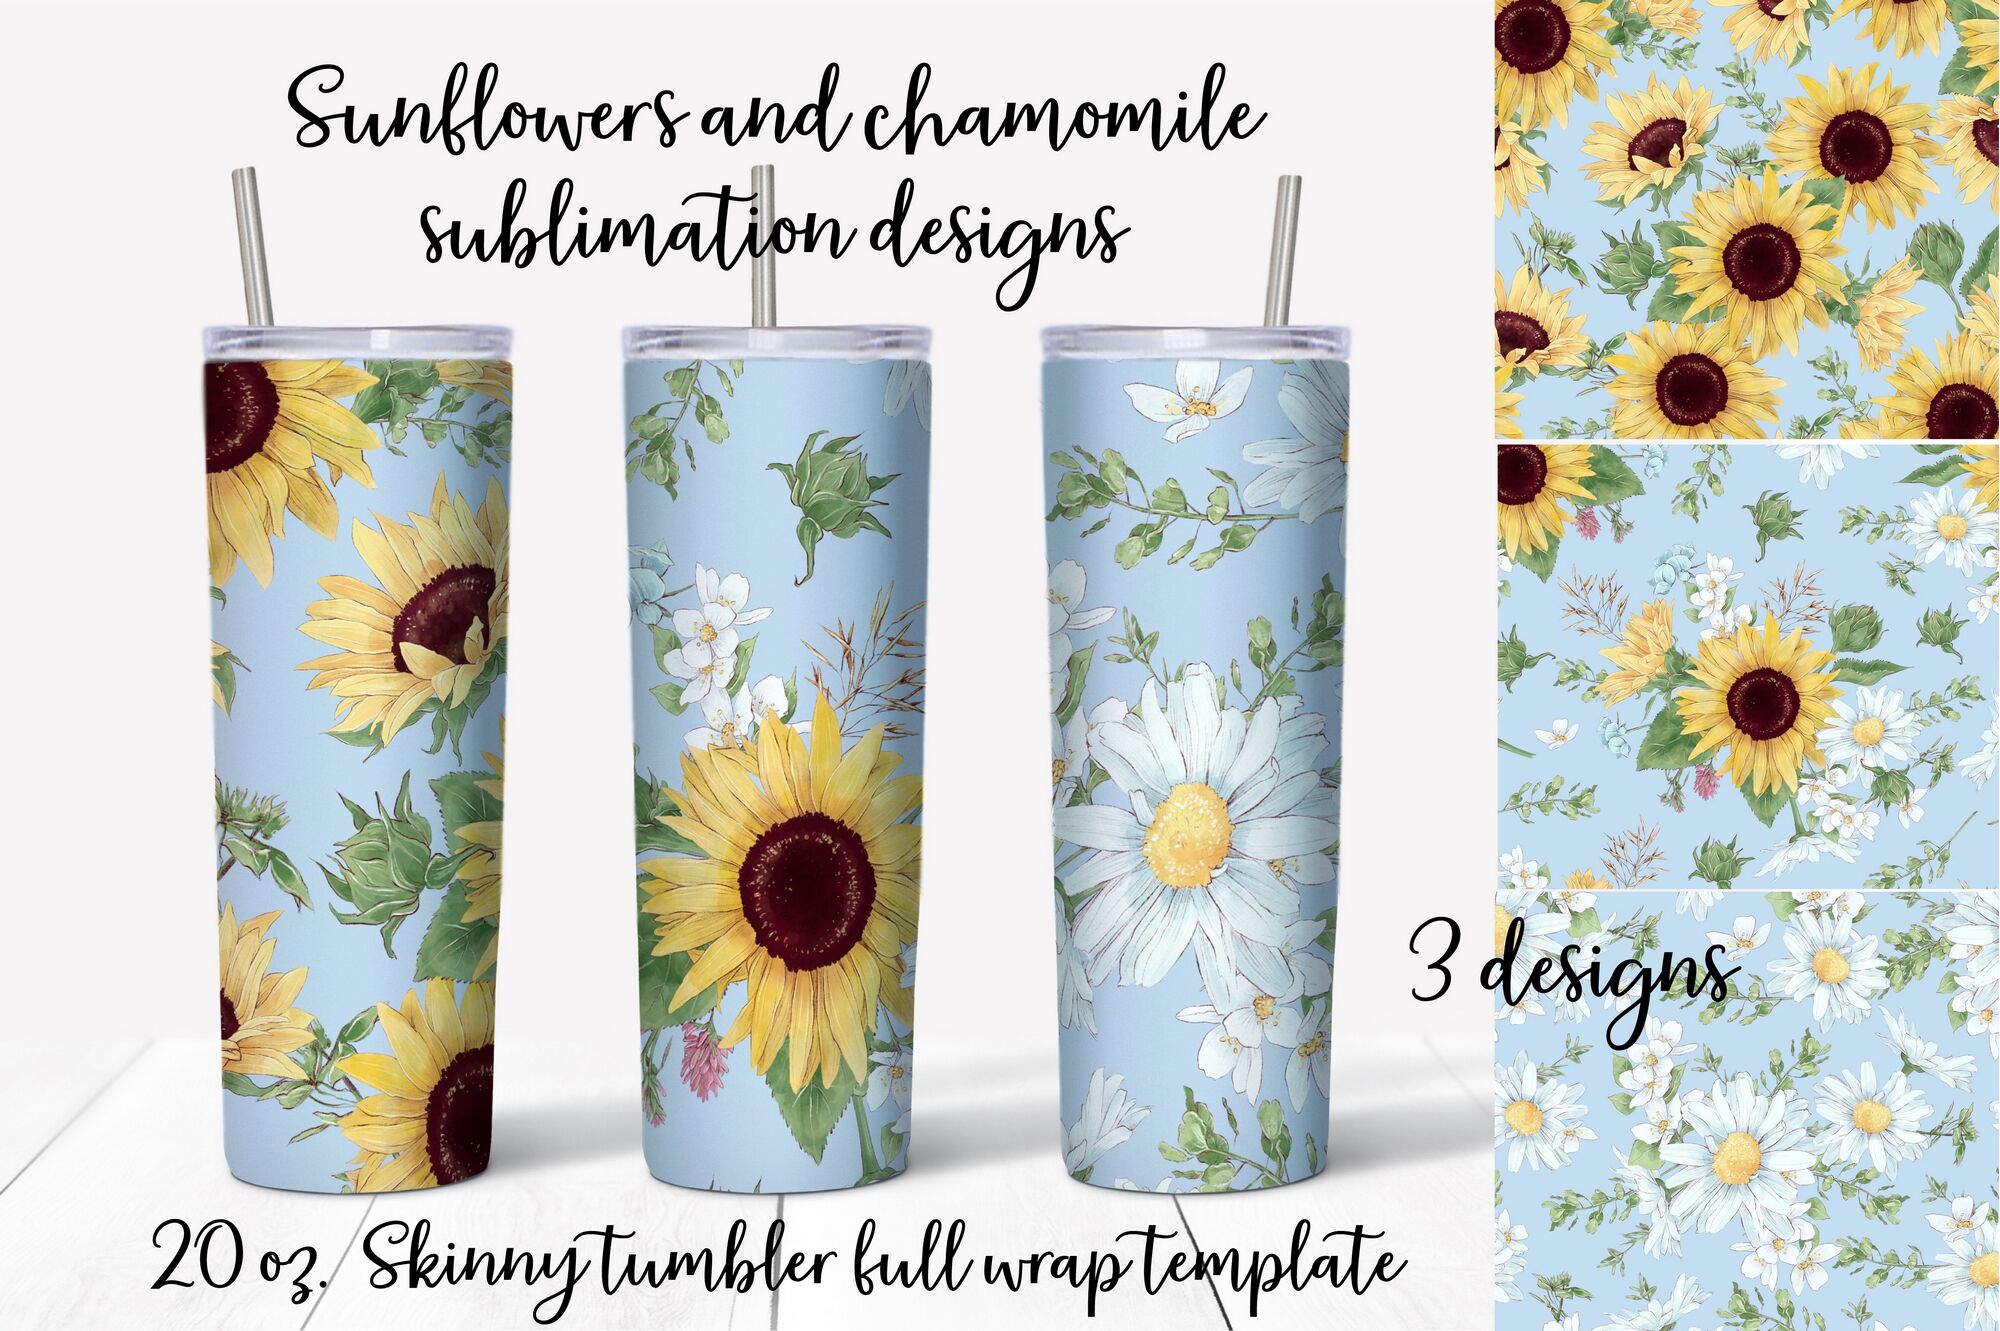 Spring Bunny – Tumbler Sublimation Transfer – Ready To Press